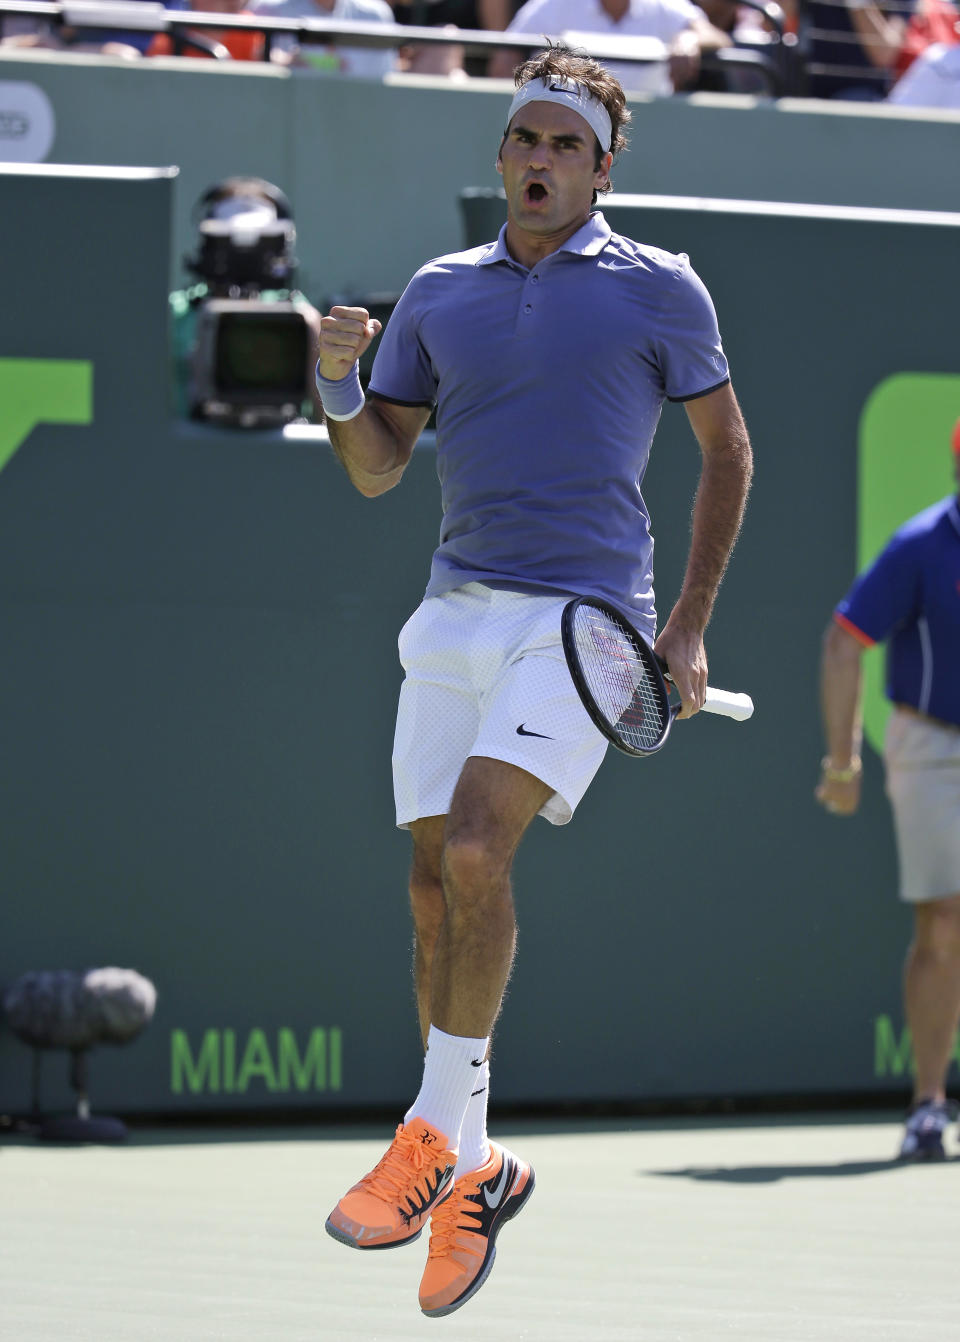 Roger Federer, of Switzerland, leaps into the air after defeating Ivo Karlovic, of Croatia, 6-4, 7-6 (7-4) at the Sony Open tennis tournament, Friday, March 21, 2014, in Key Biscayne, Fla. (AP Photo/Lynne Sladky)